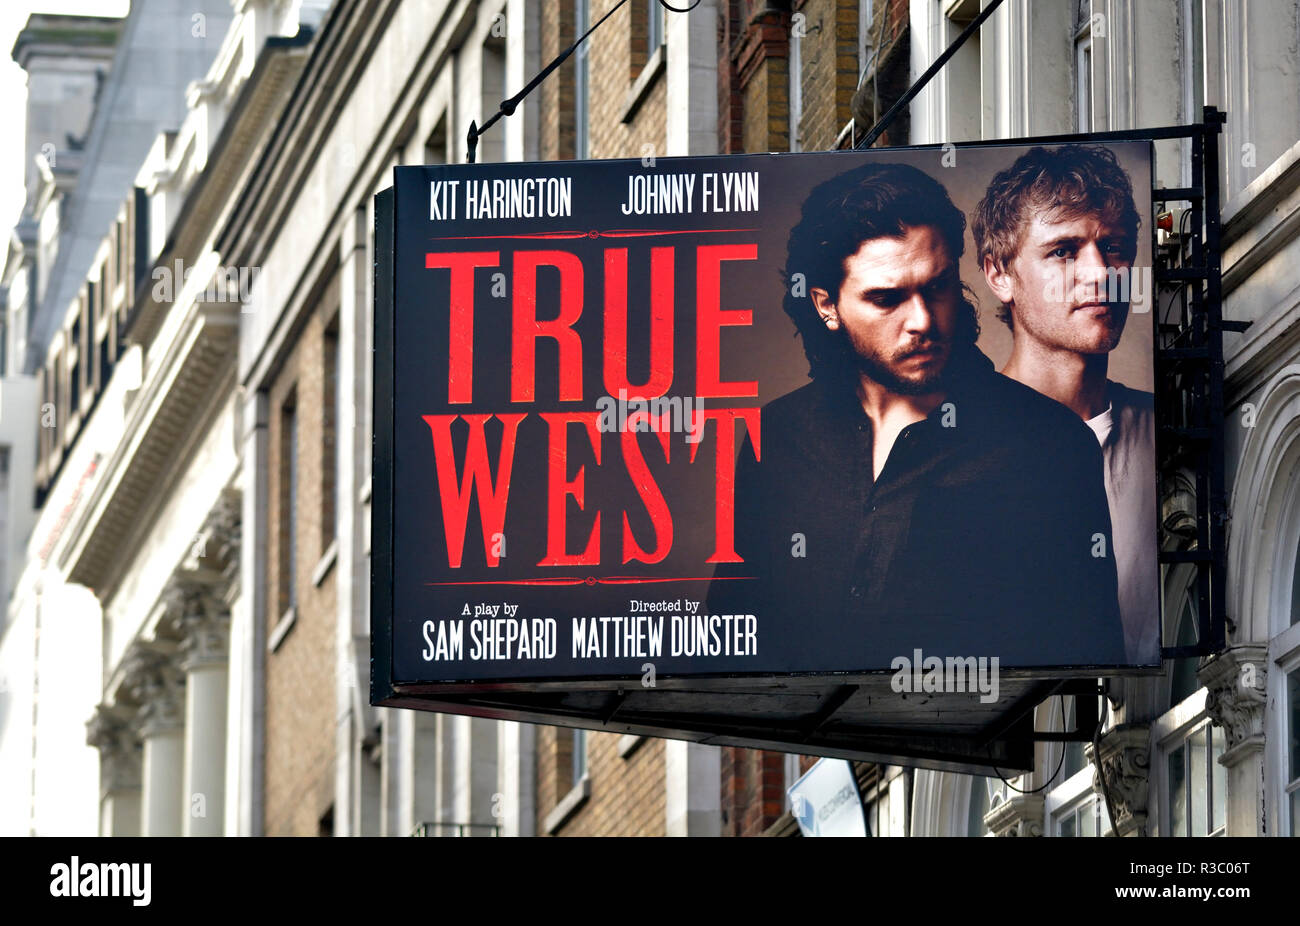 London, England, UK. 'True West' at the Vaudeville Theatre, the Strand. Play by Sam Shepard, starring Kit Harrington and Johnny Flynn, starting 23rd N Stock Photo